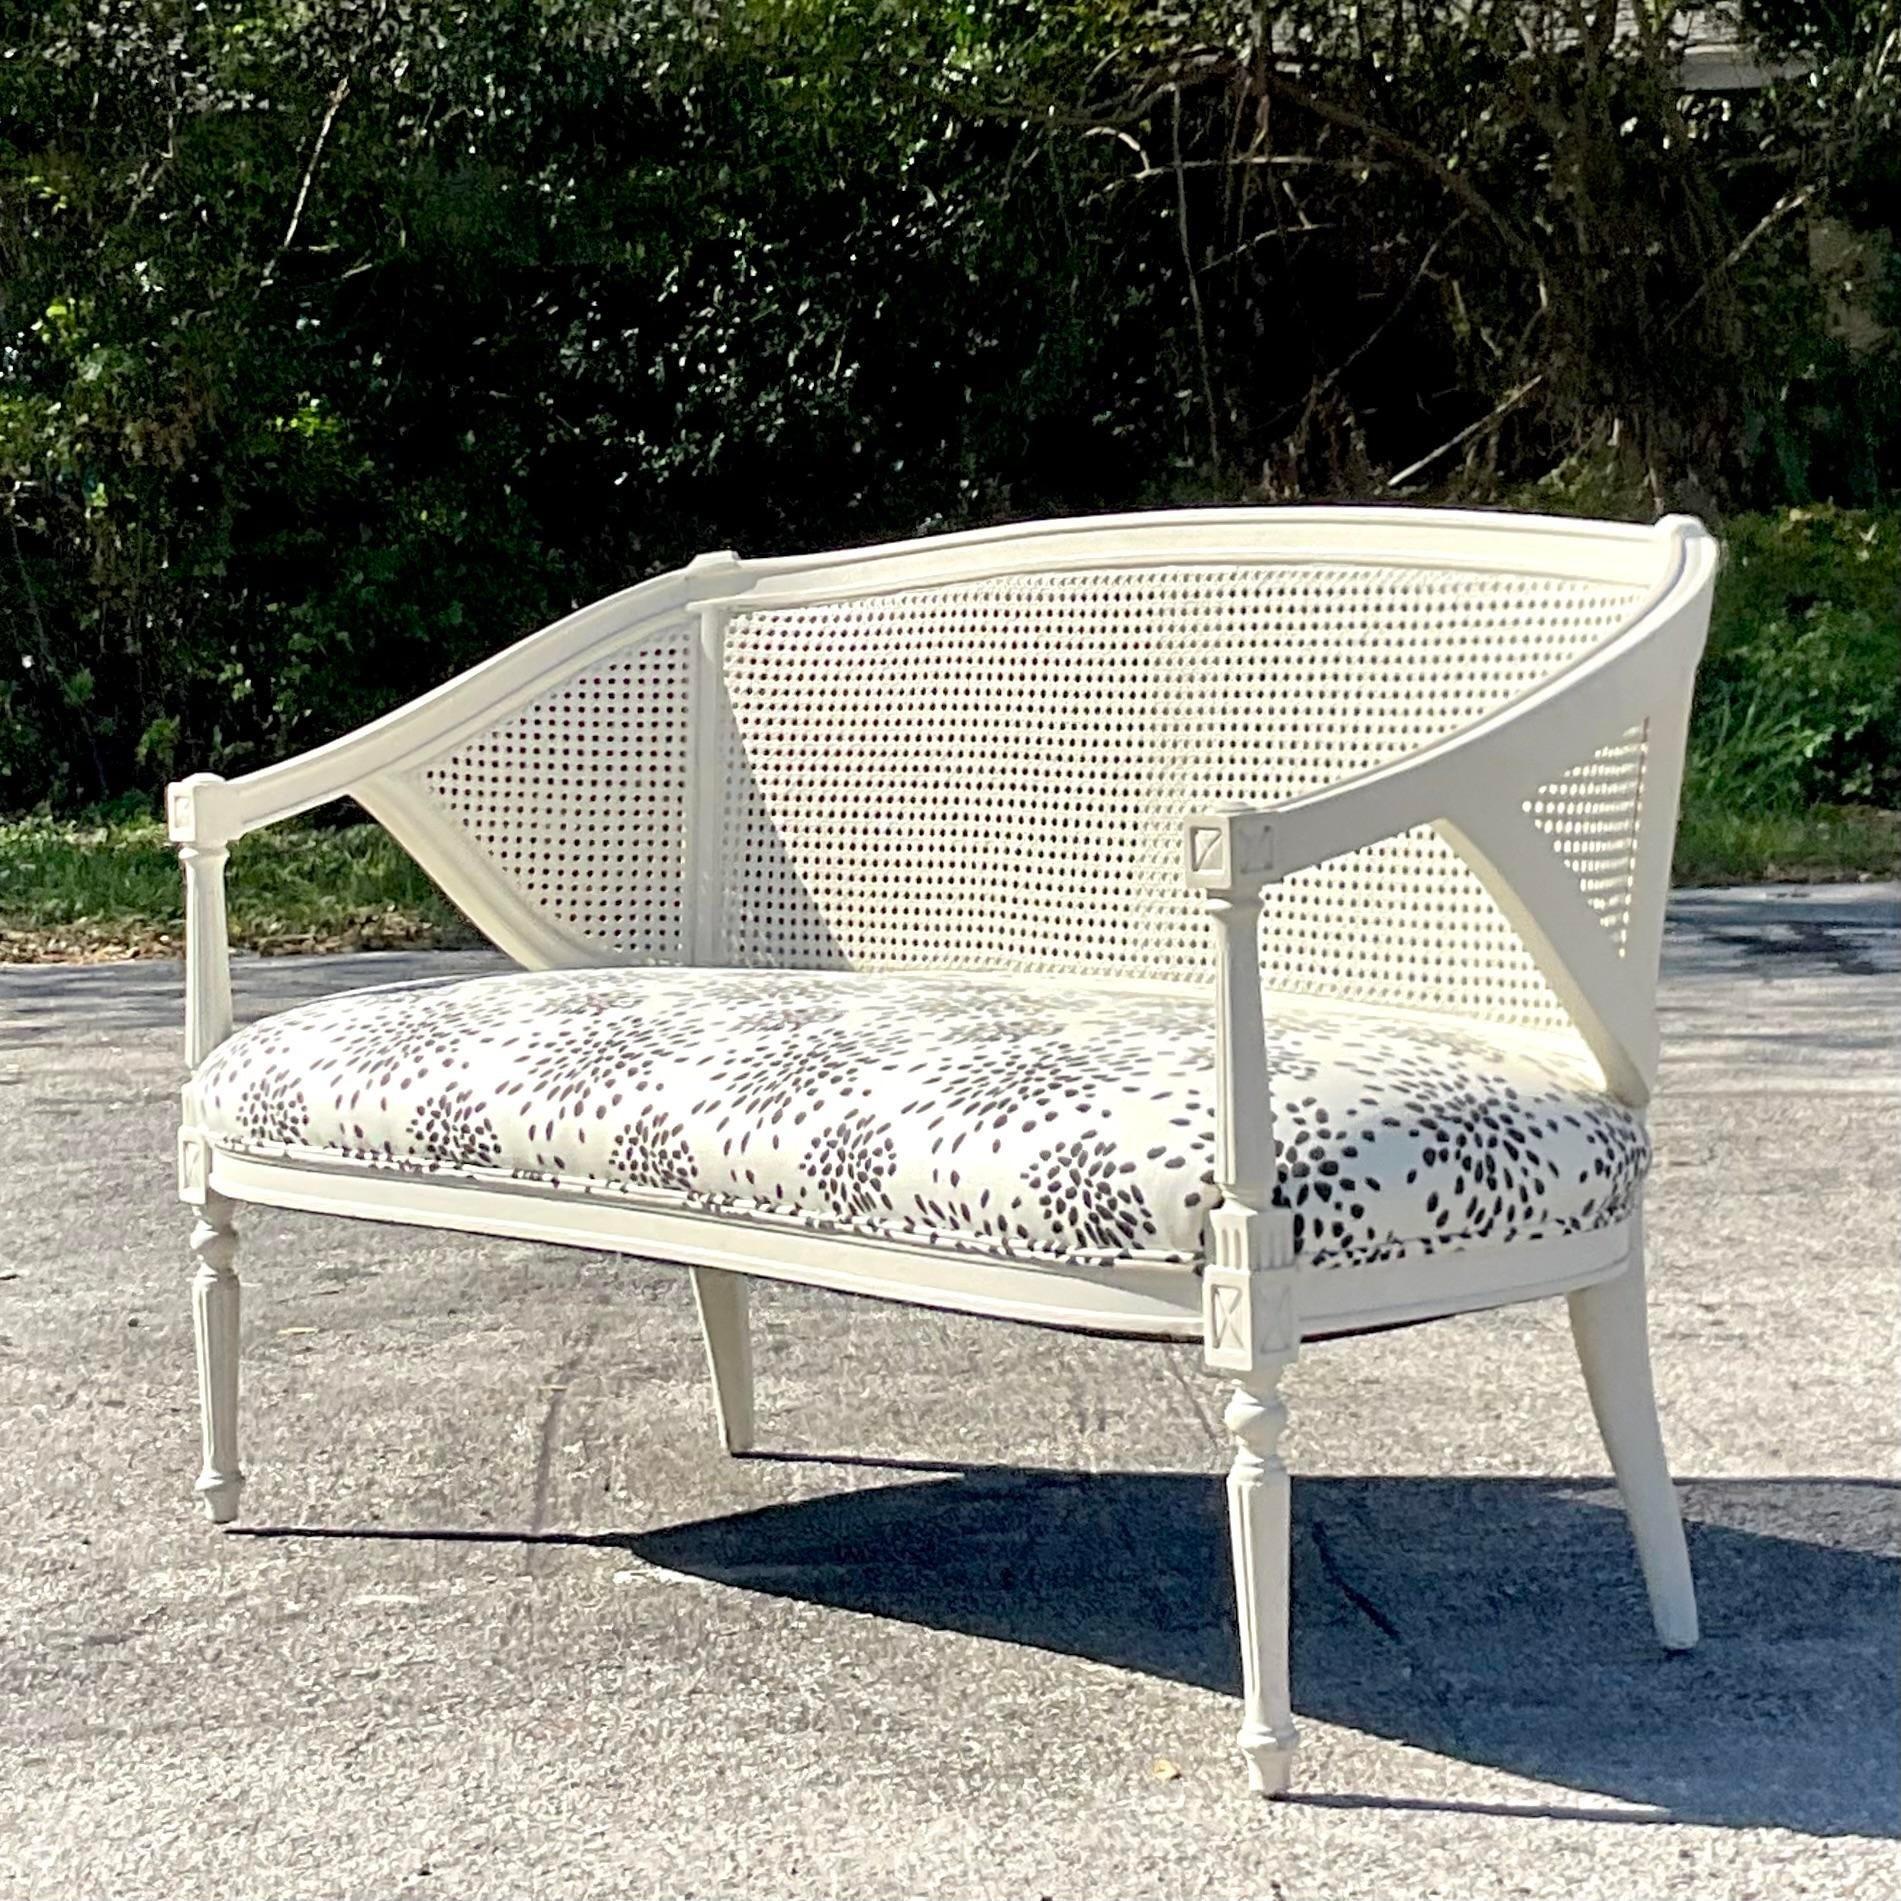 A stunning vintage Regency Settee. A chic cane back frame with the most beautiful Albert Hadley “Fireworks” upholstery. A gorgeous graphic statement. Acquired from a Beautiful Palm Beach home.